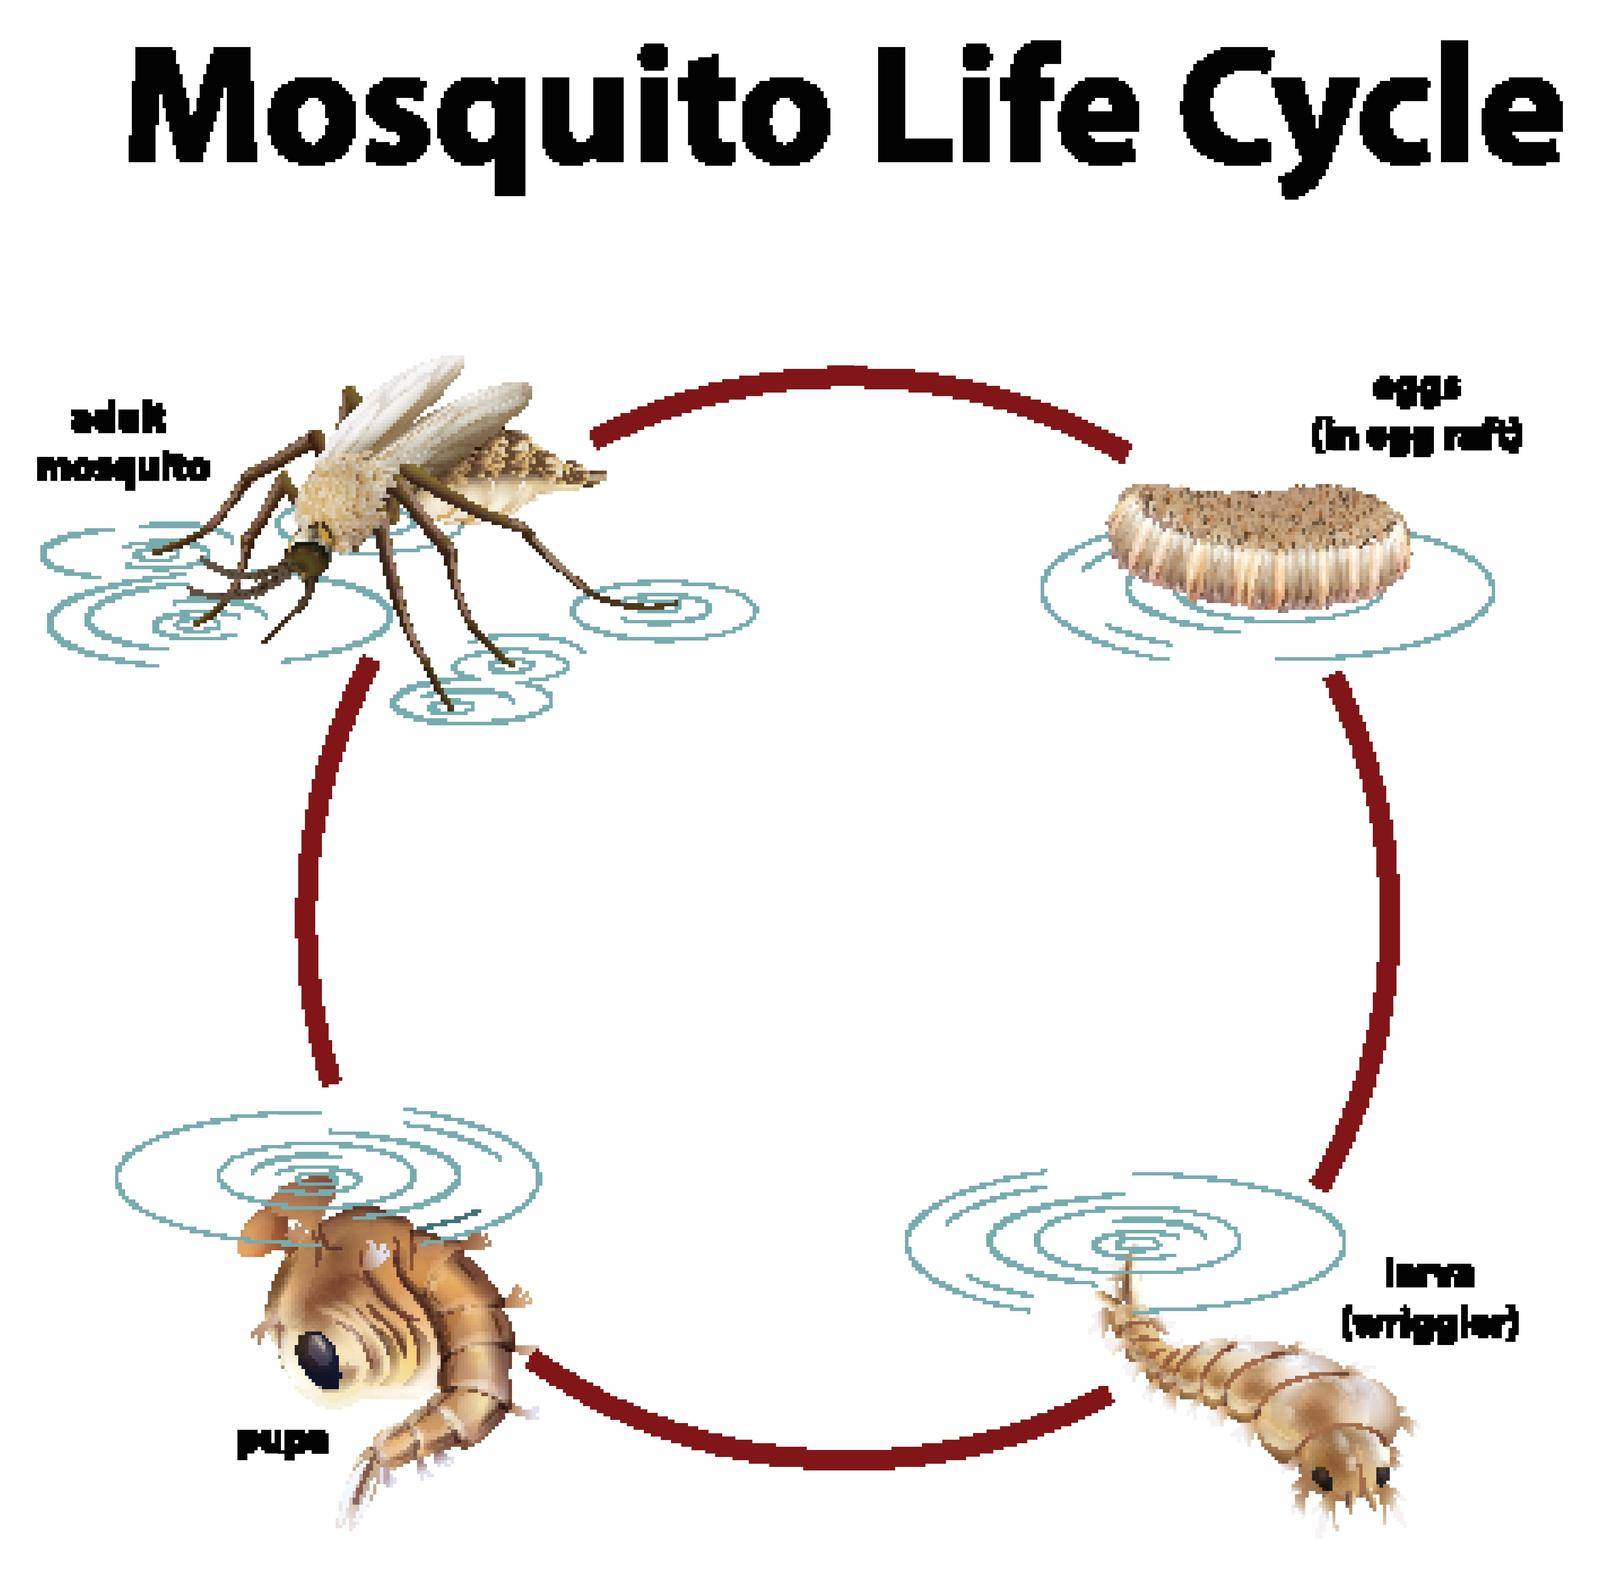 Diagram showing life cycle of mosquito by iimages